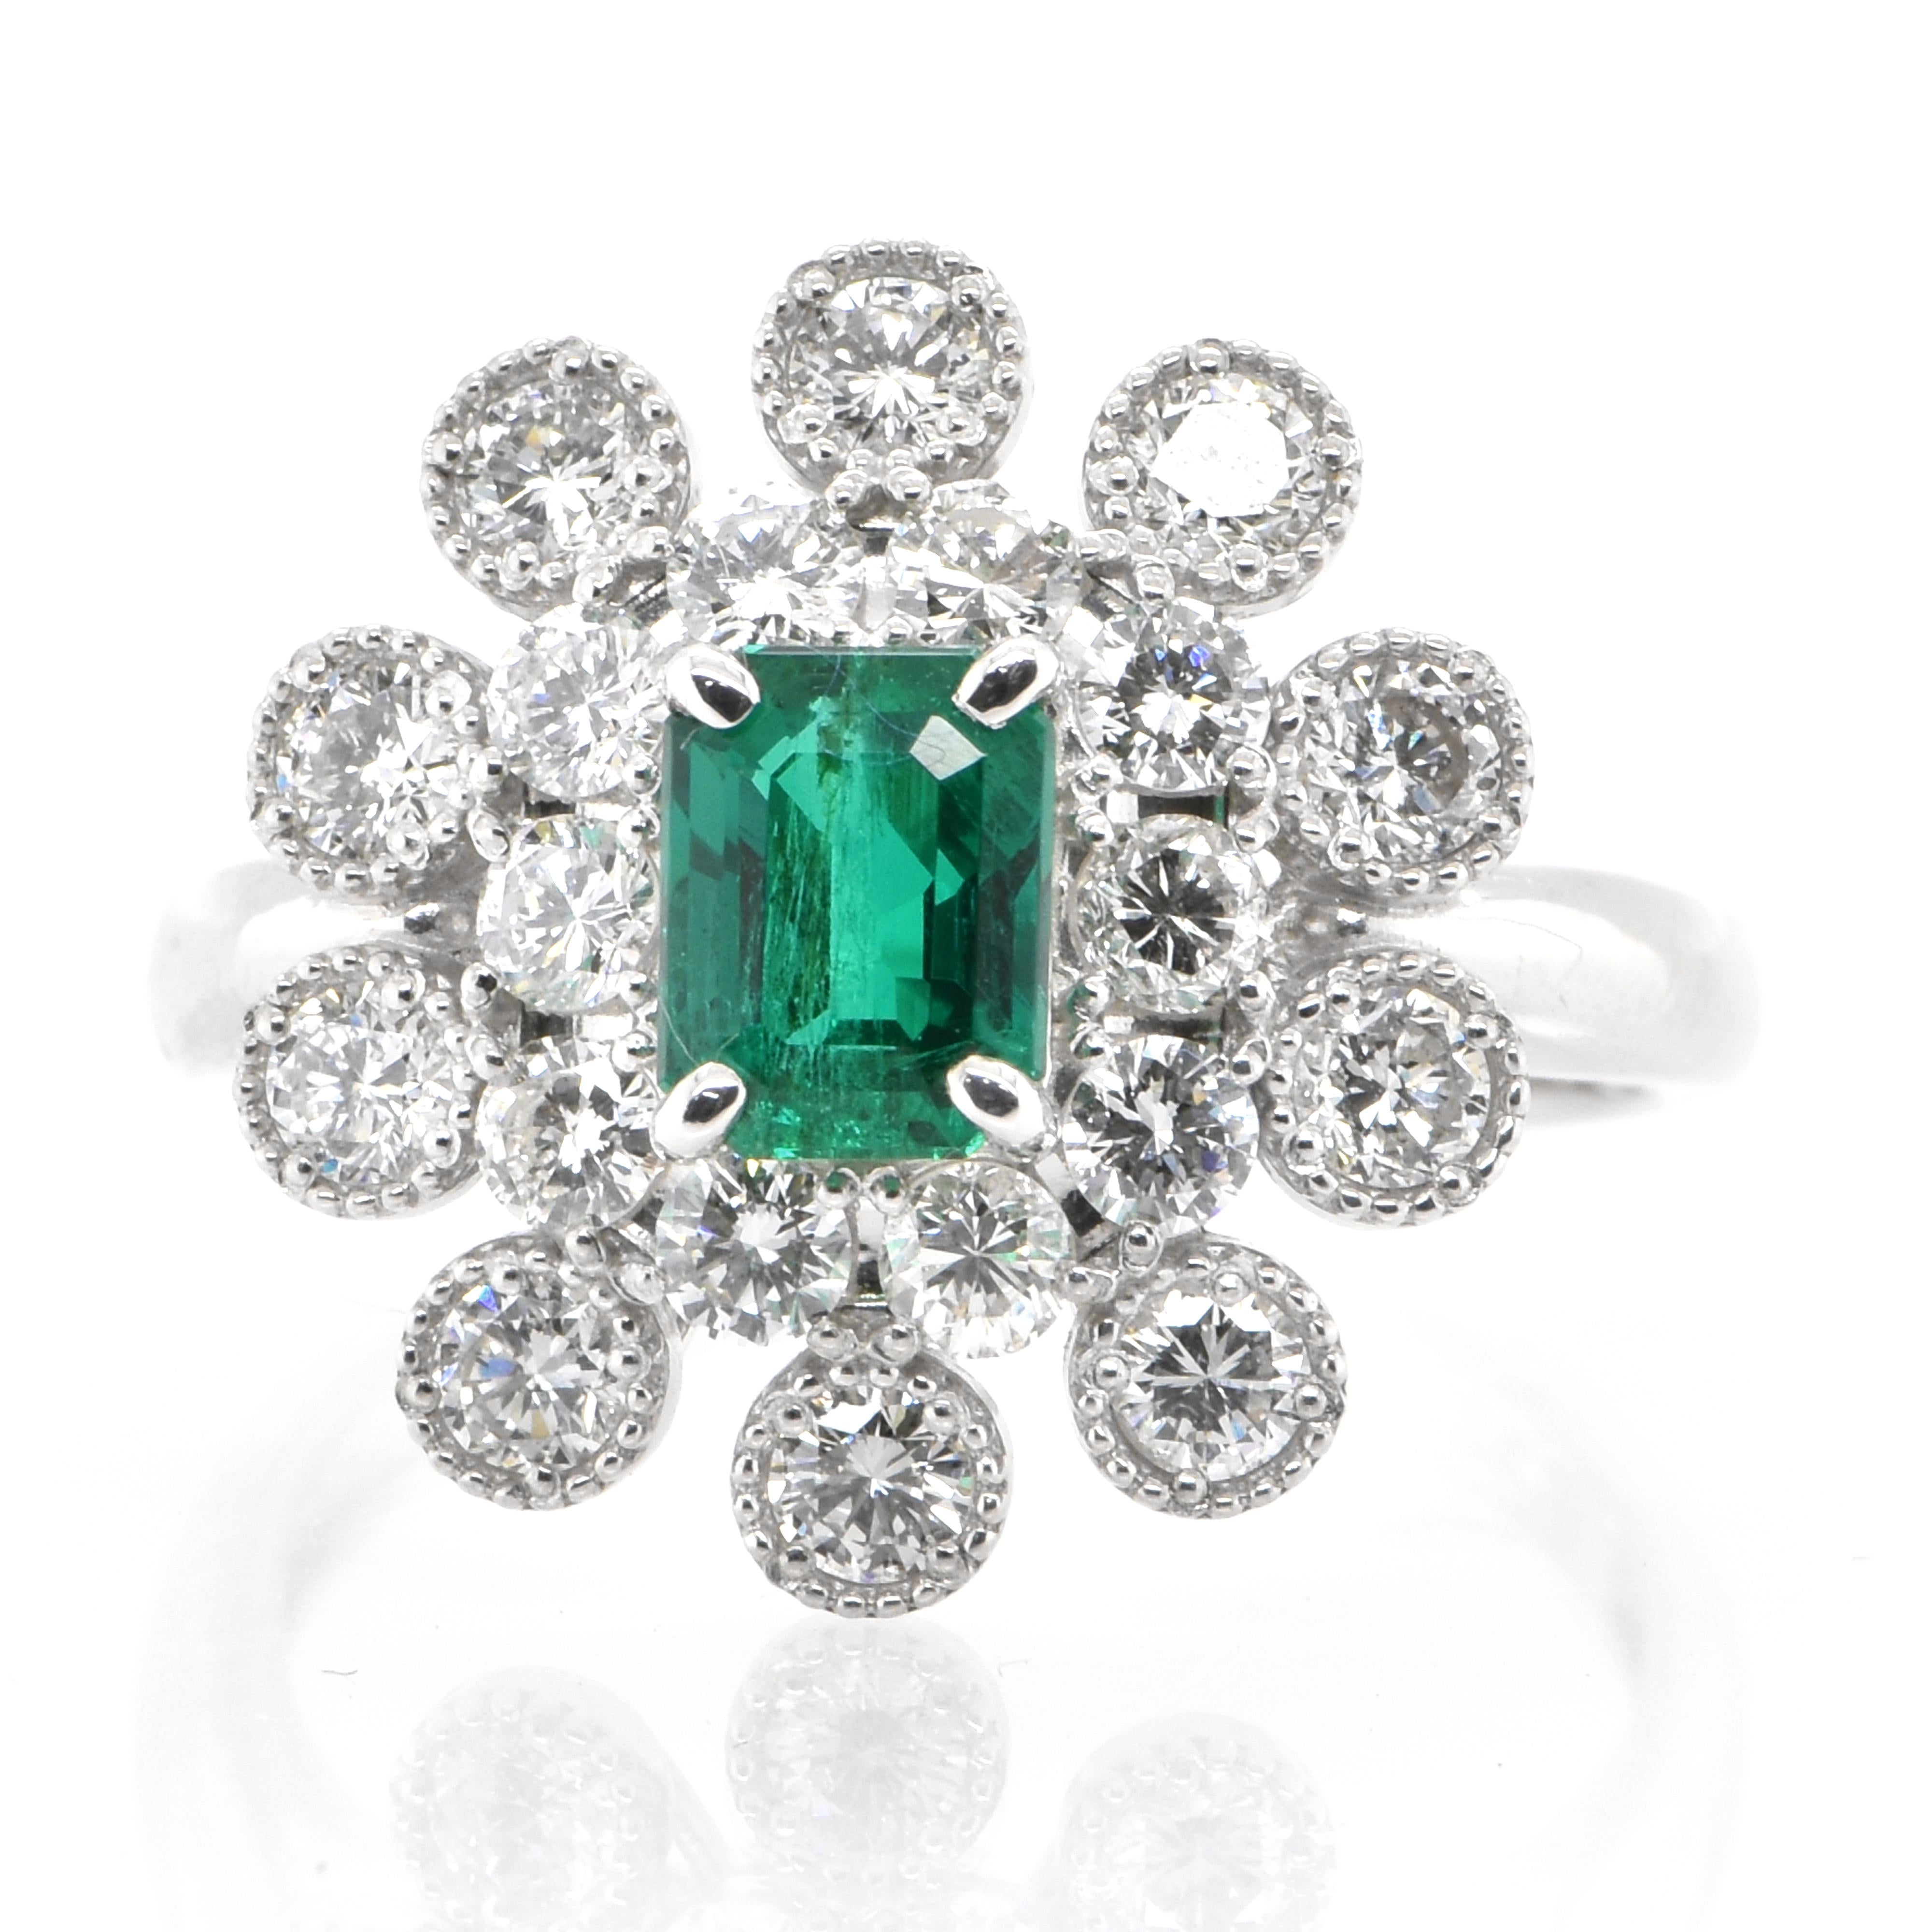 A stunning ring featuring a 0.76 Carat Natural Emerald and 1.16 Carats of Diamond Accents set in Platinum. People have admired emerald’s green for thousands of years. Emeralds have always been associated with the lushest landscapes and the richest